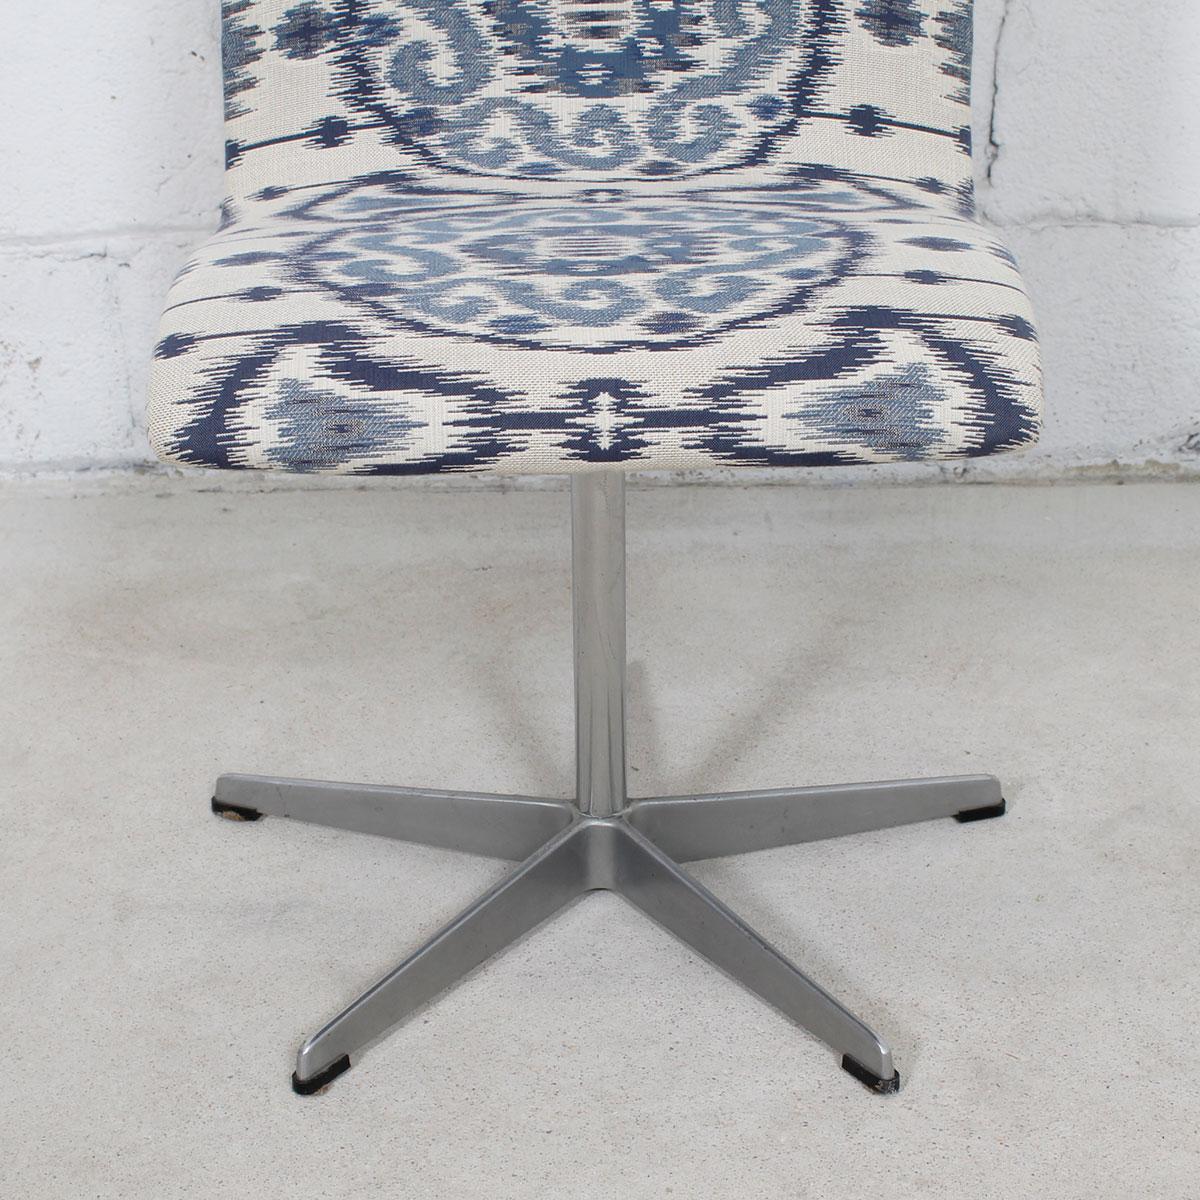 Set of 6 Vintage Fritz Hansen Oxford Chairs in New Blue & White Ikat Upholstery For Sale 3